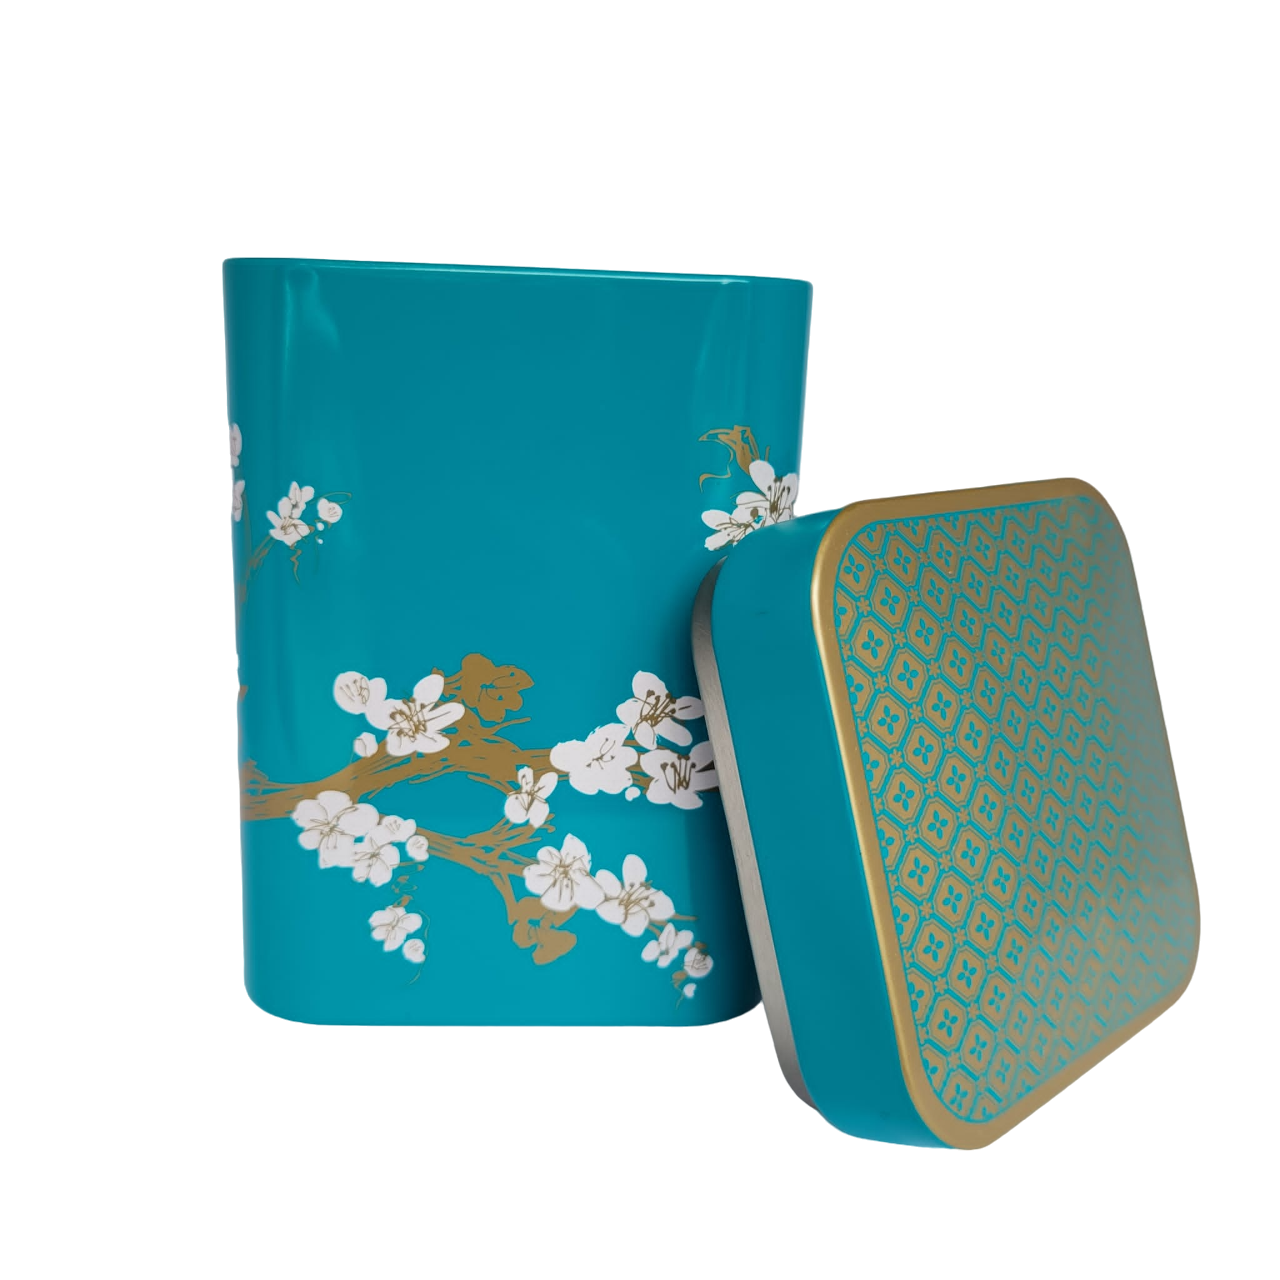 Cherry Blossom Tea Caddy - Red Blue and Dark Green